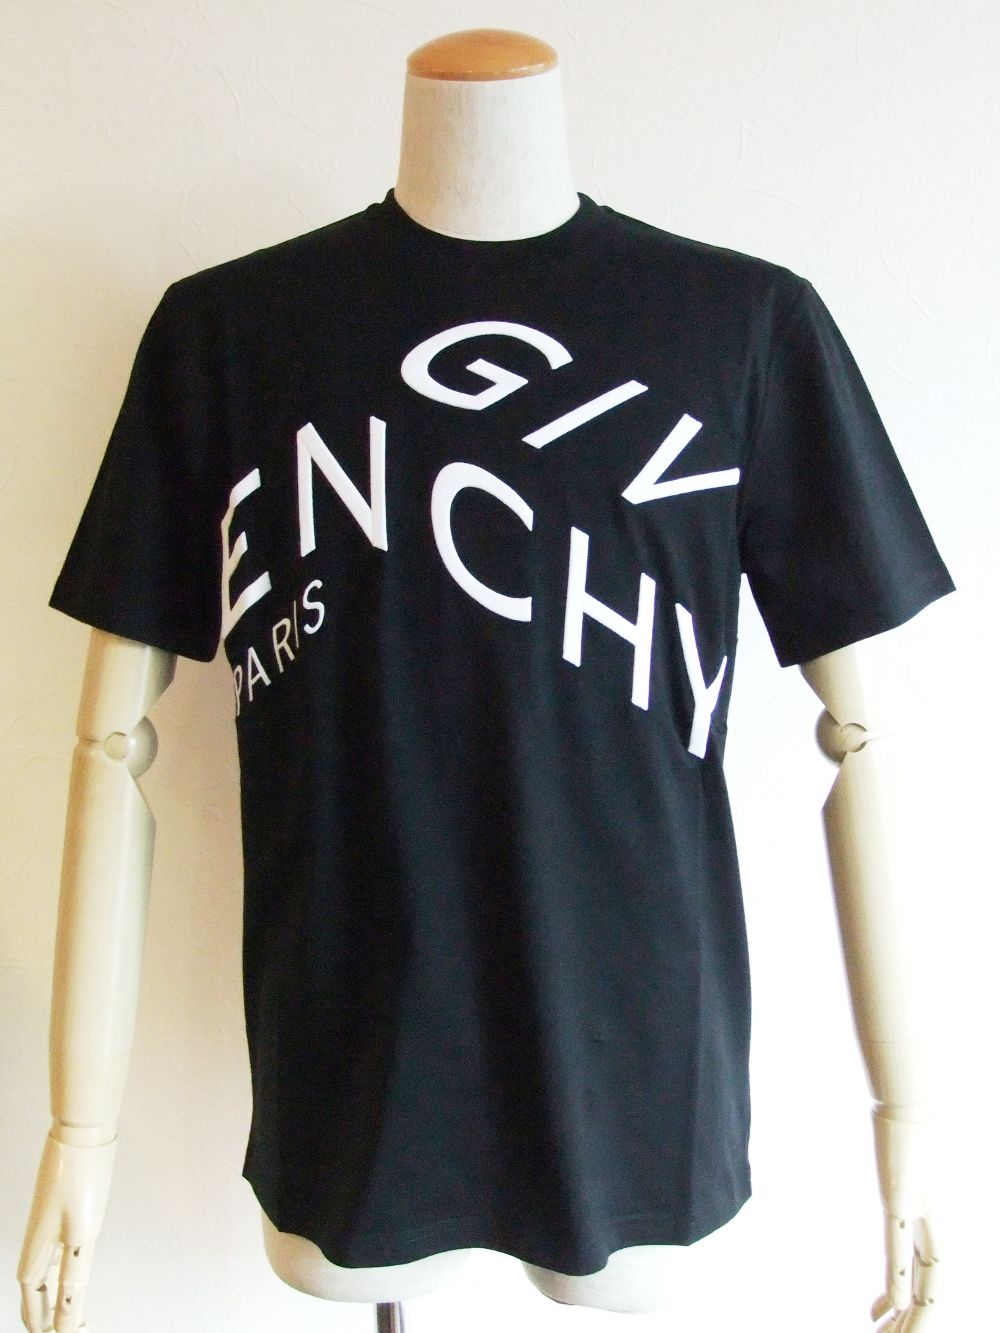 GIVENCHY - GIVENCHY REFRACTED SLIM FIT スリムフィット エンブロイ 